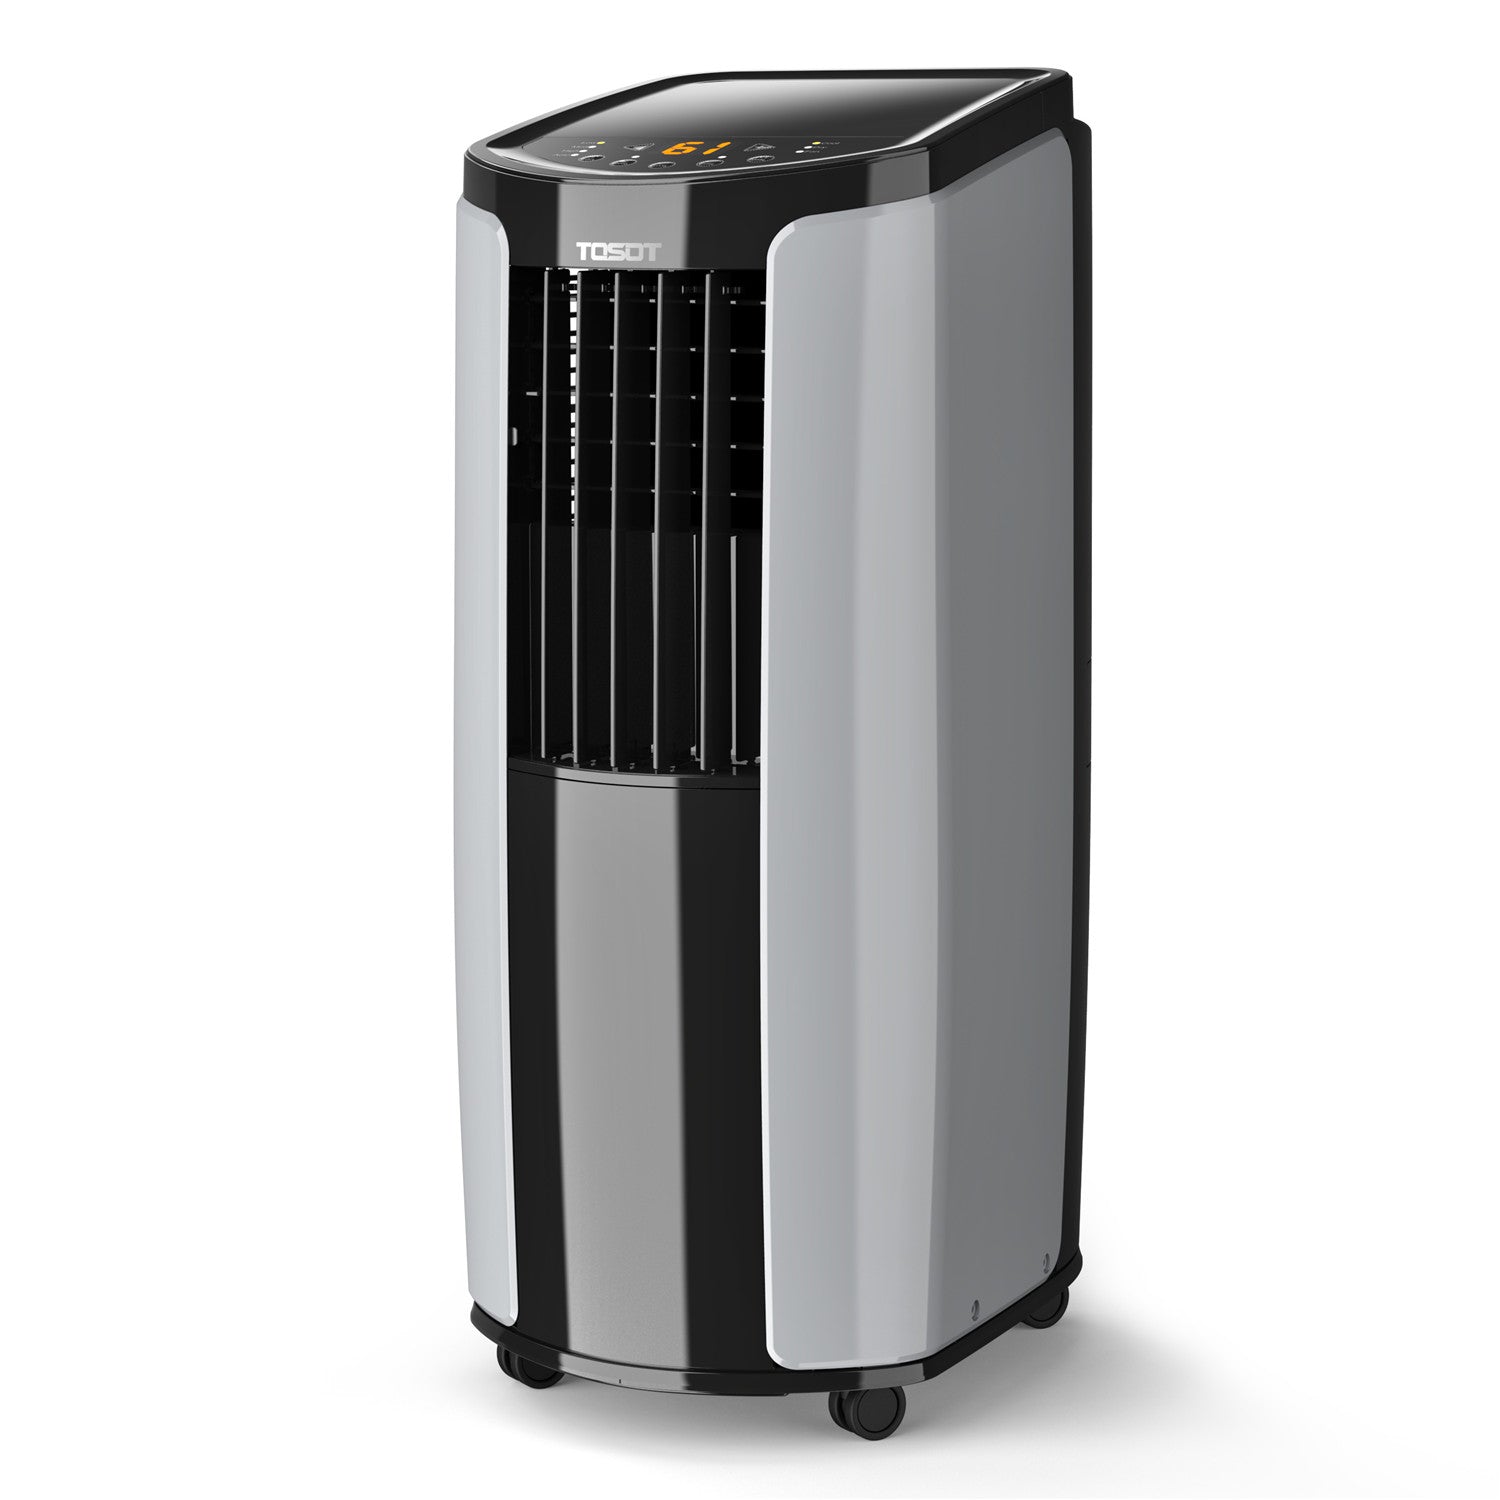 Why Does My Portable Air Have Different ratings? – TOSOT